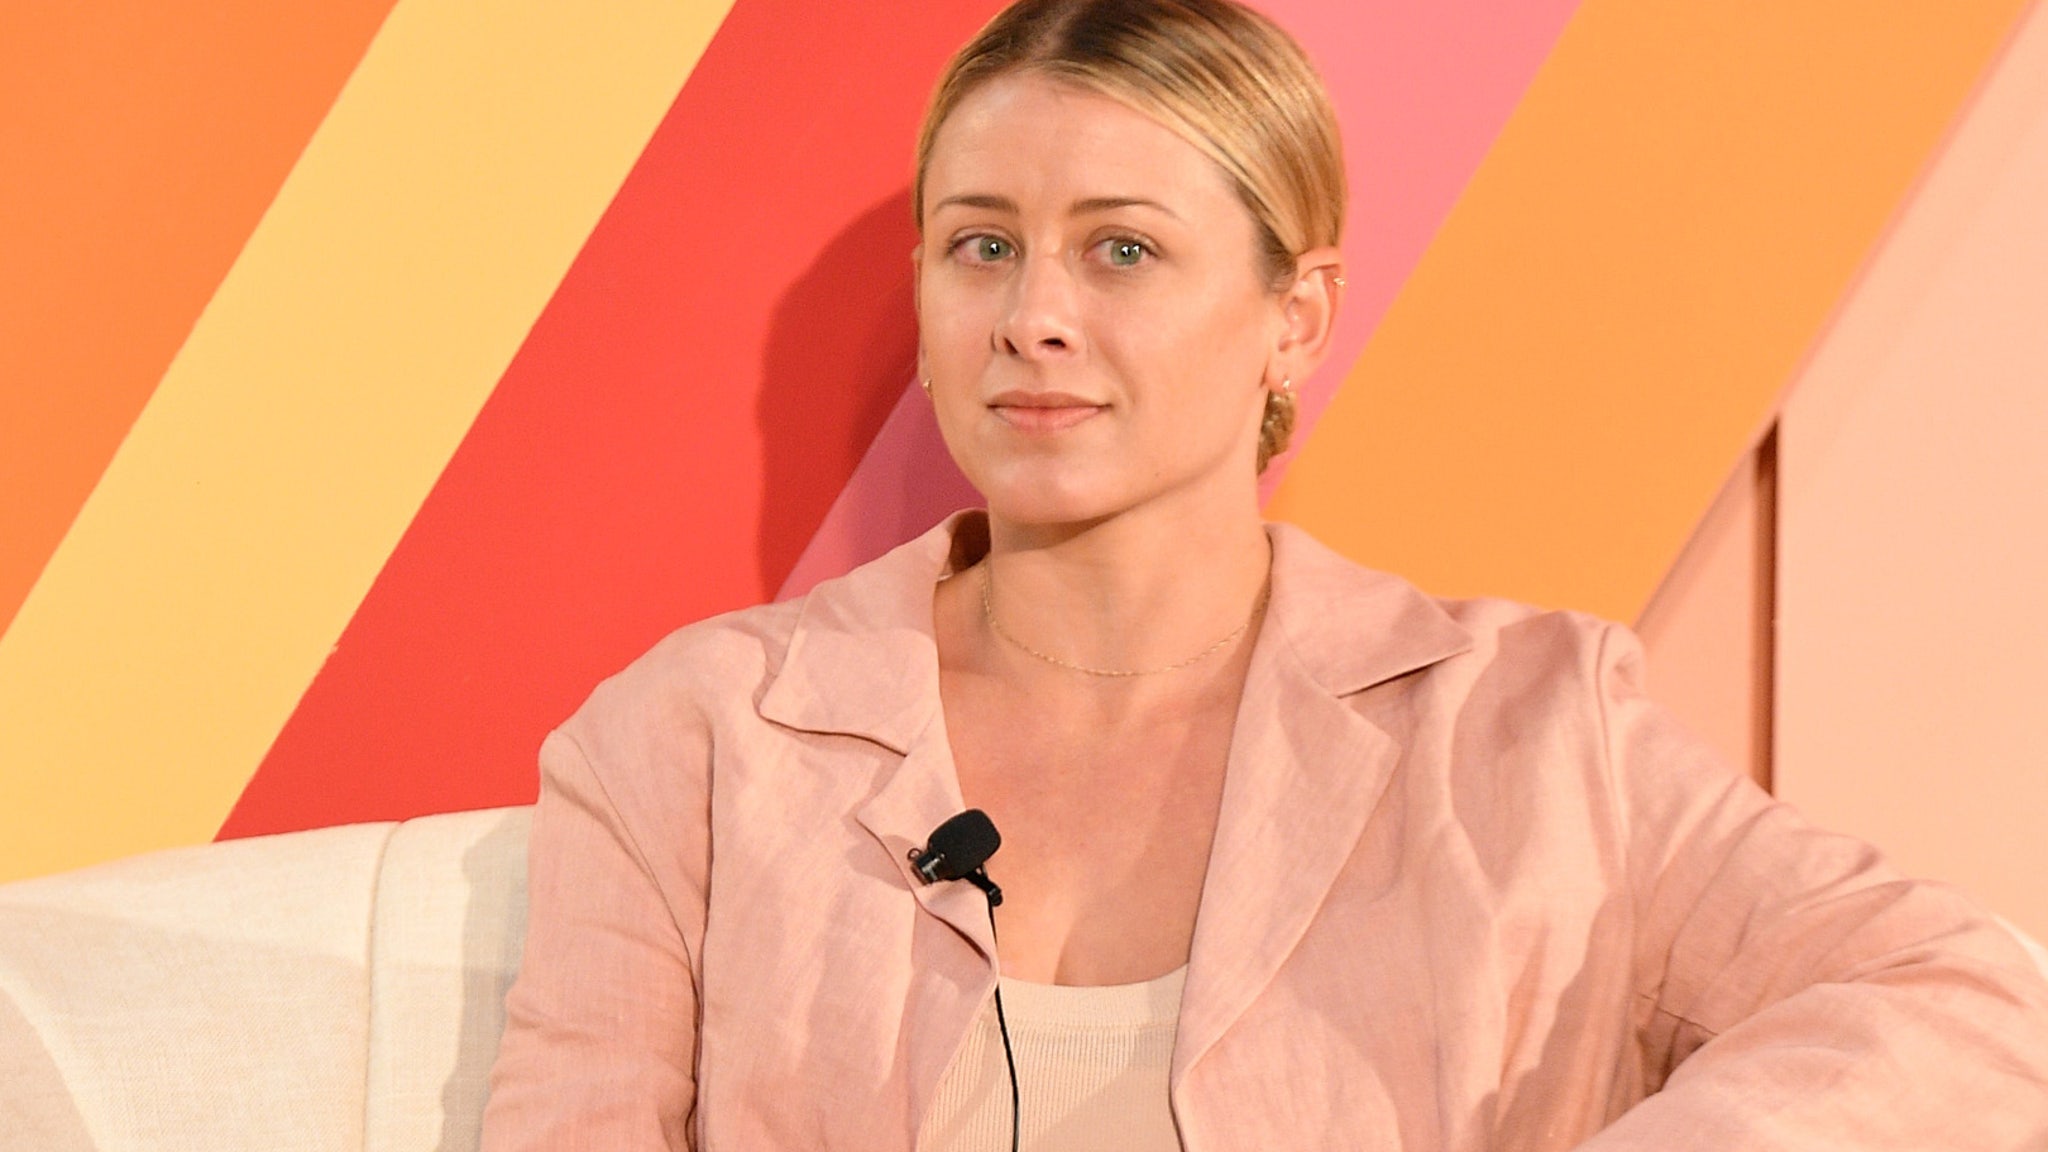 Lo Bosworth Says Women of The Hills Were Often Put in 'Compromising Situations'